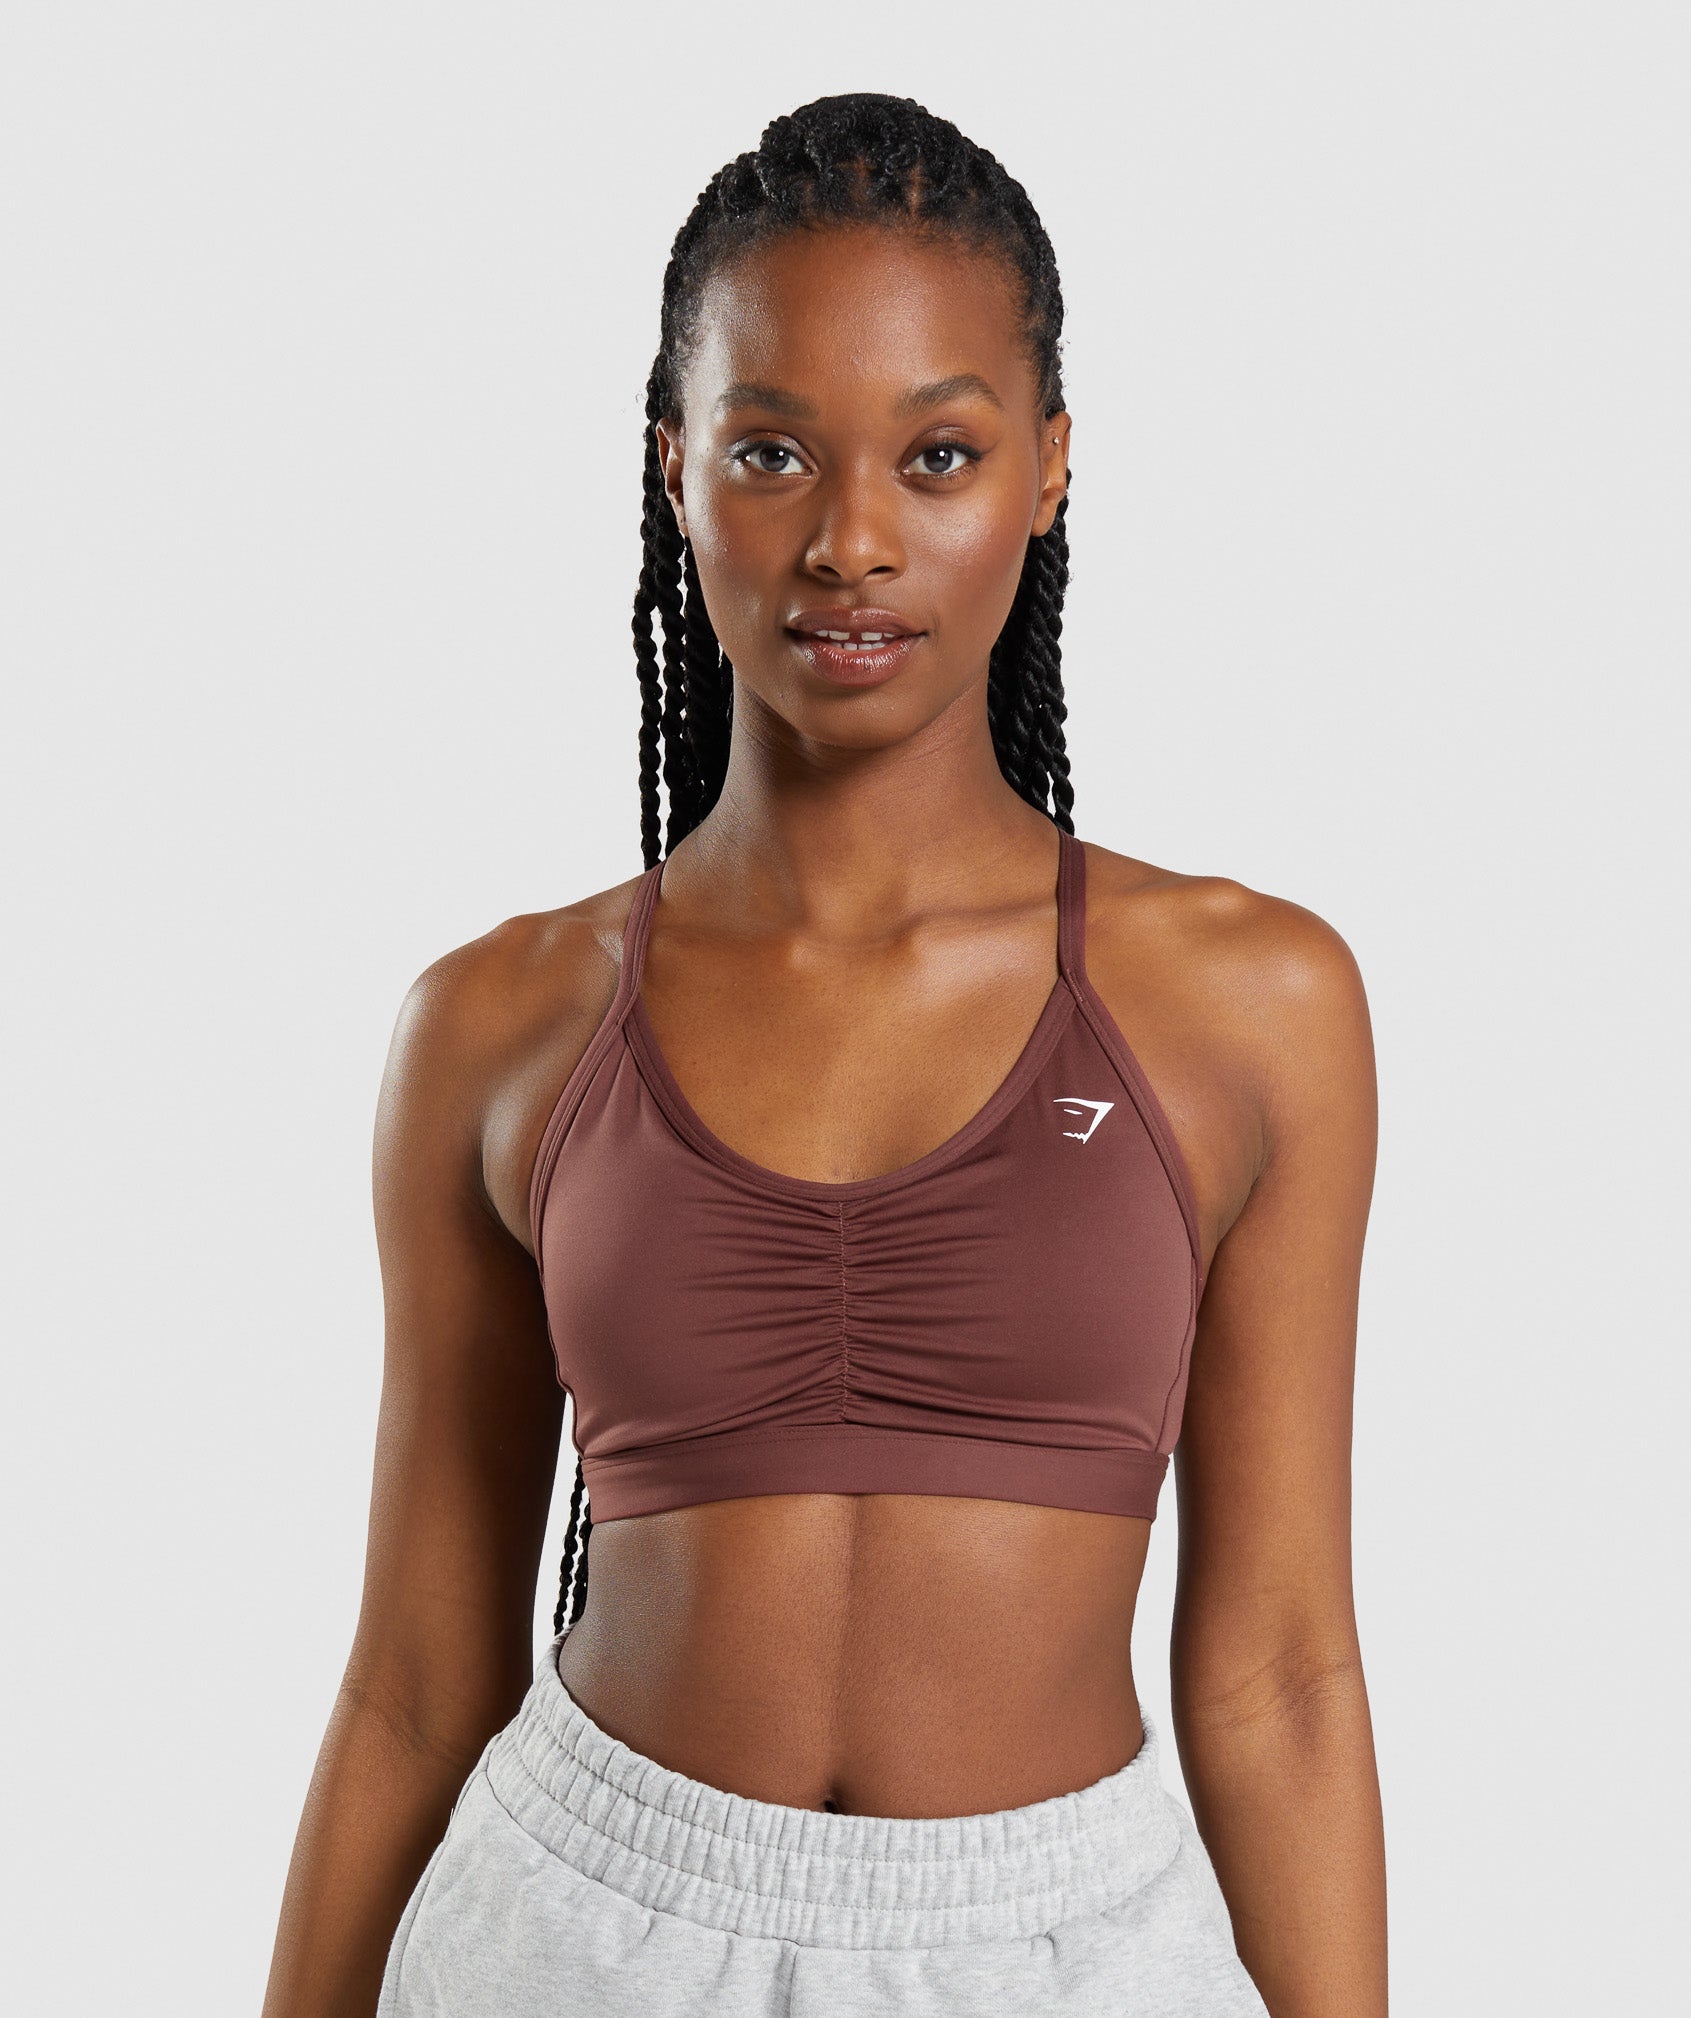 Gymshark Ruched Bra (Coconut White & Light Pink) Size S, Women's Fashion,  Activewear on Carousell